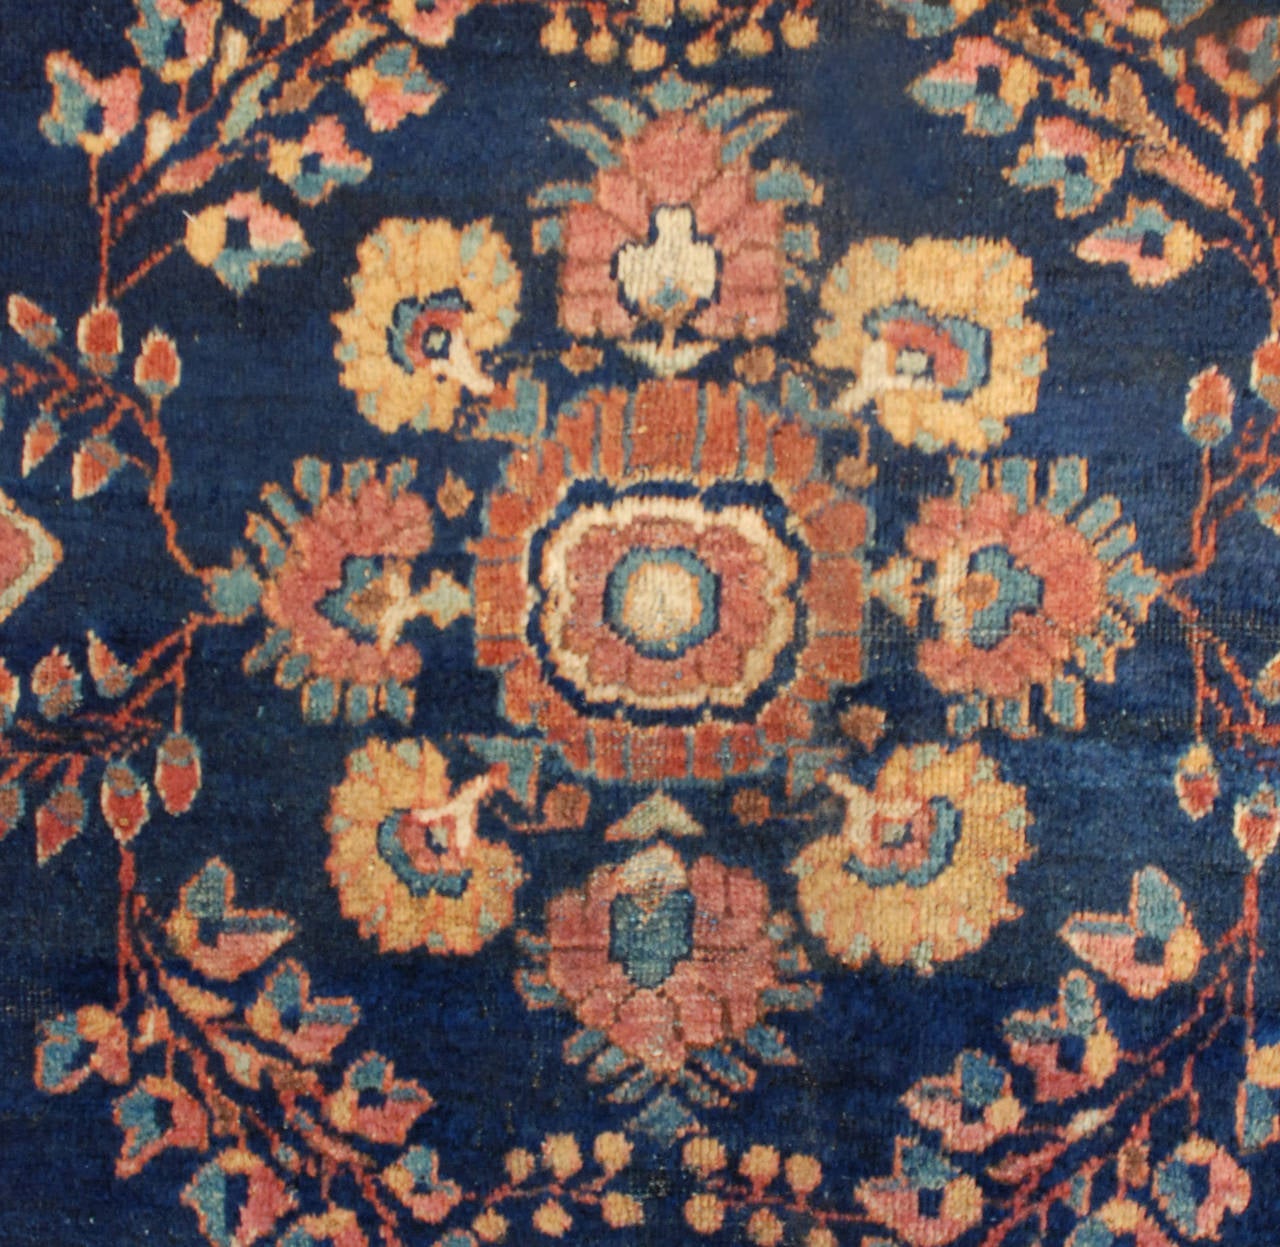 A wonderful 19th century Persian Mahal rug with a beautiful all-over floral pattern on an indigo background, surrounded by multiple contrasting floral borders.